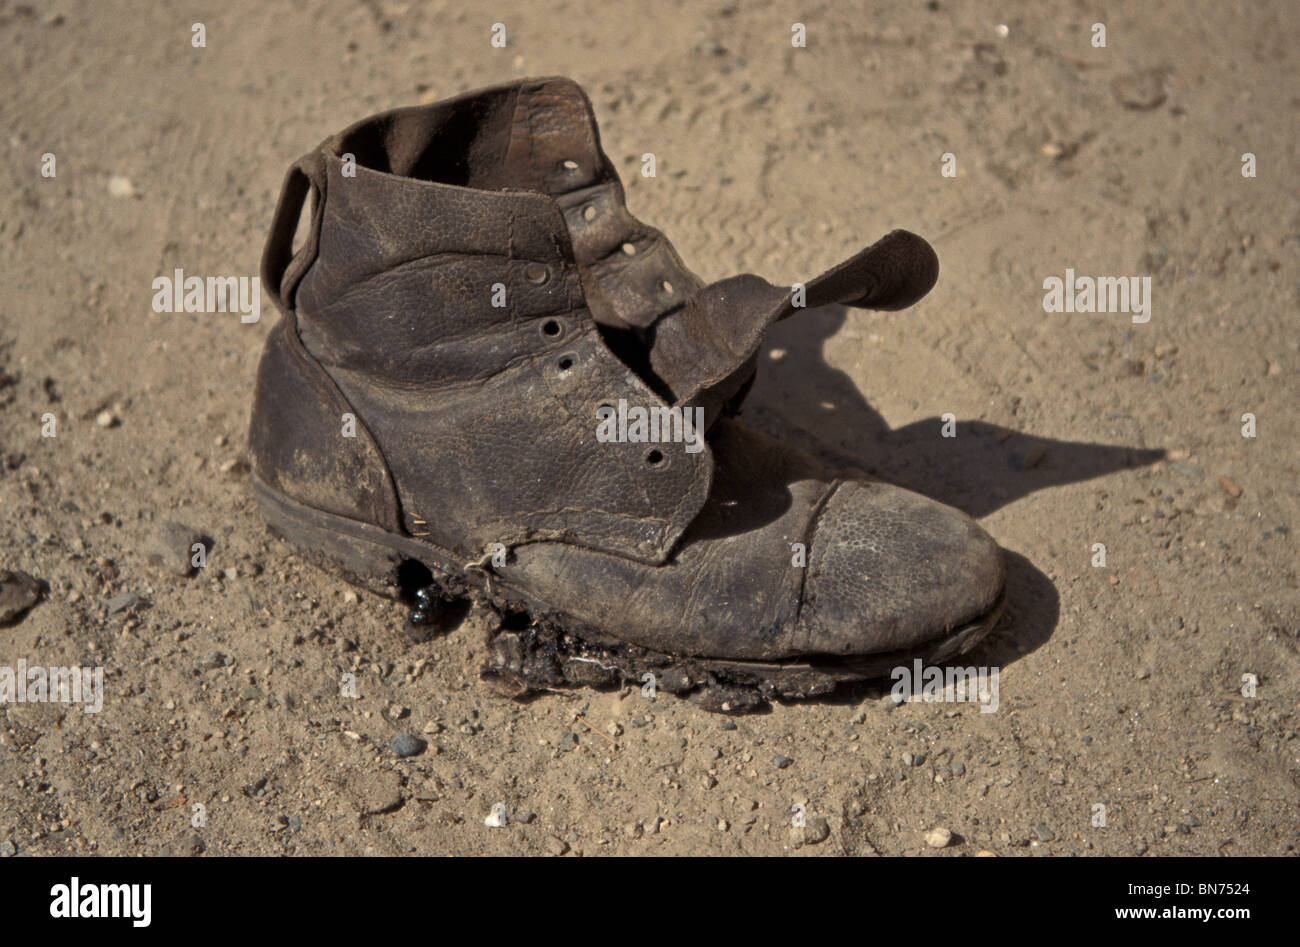 Old Boot – Worn out boot in dried up river bed. Stock Photo